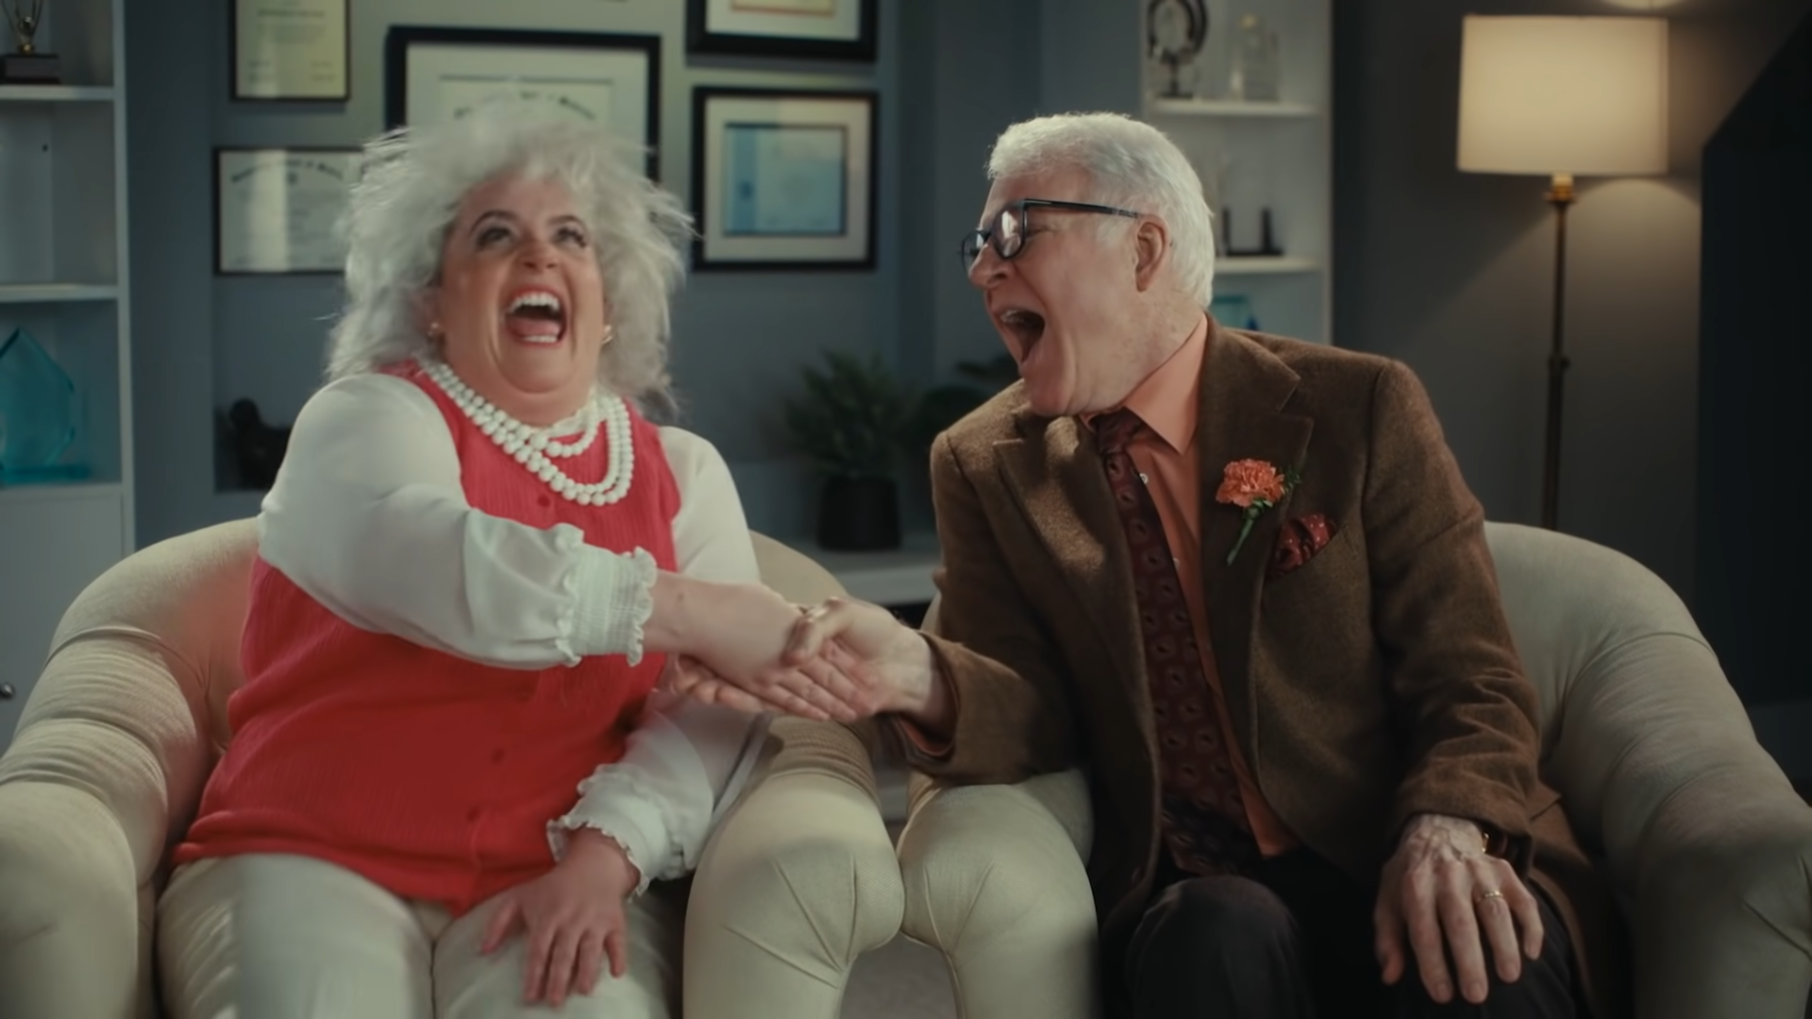 Aidy Bryant and Steve Martin appear together in a 